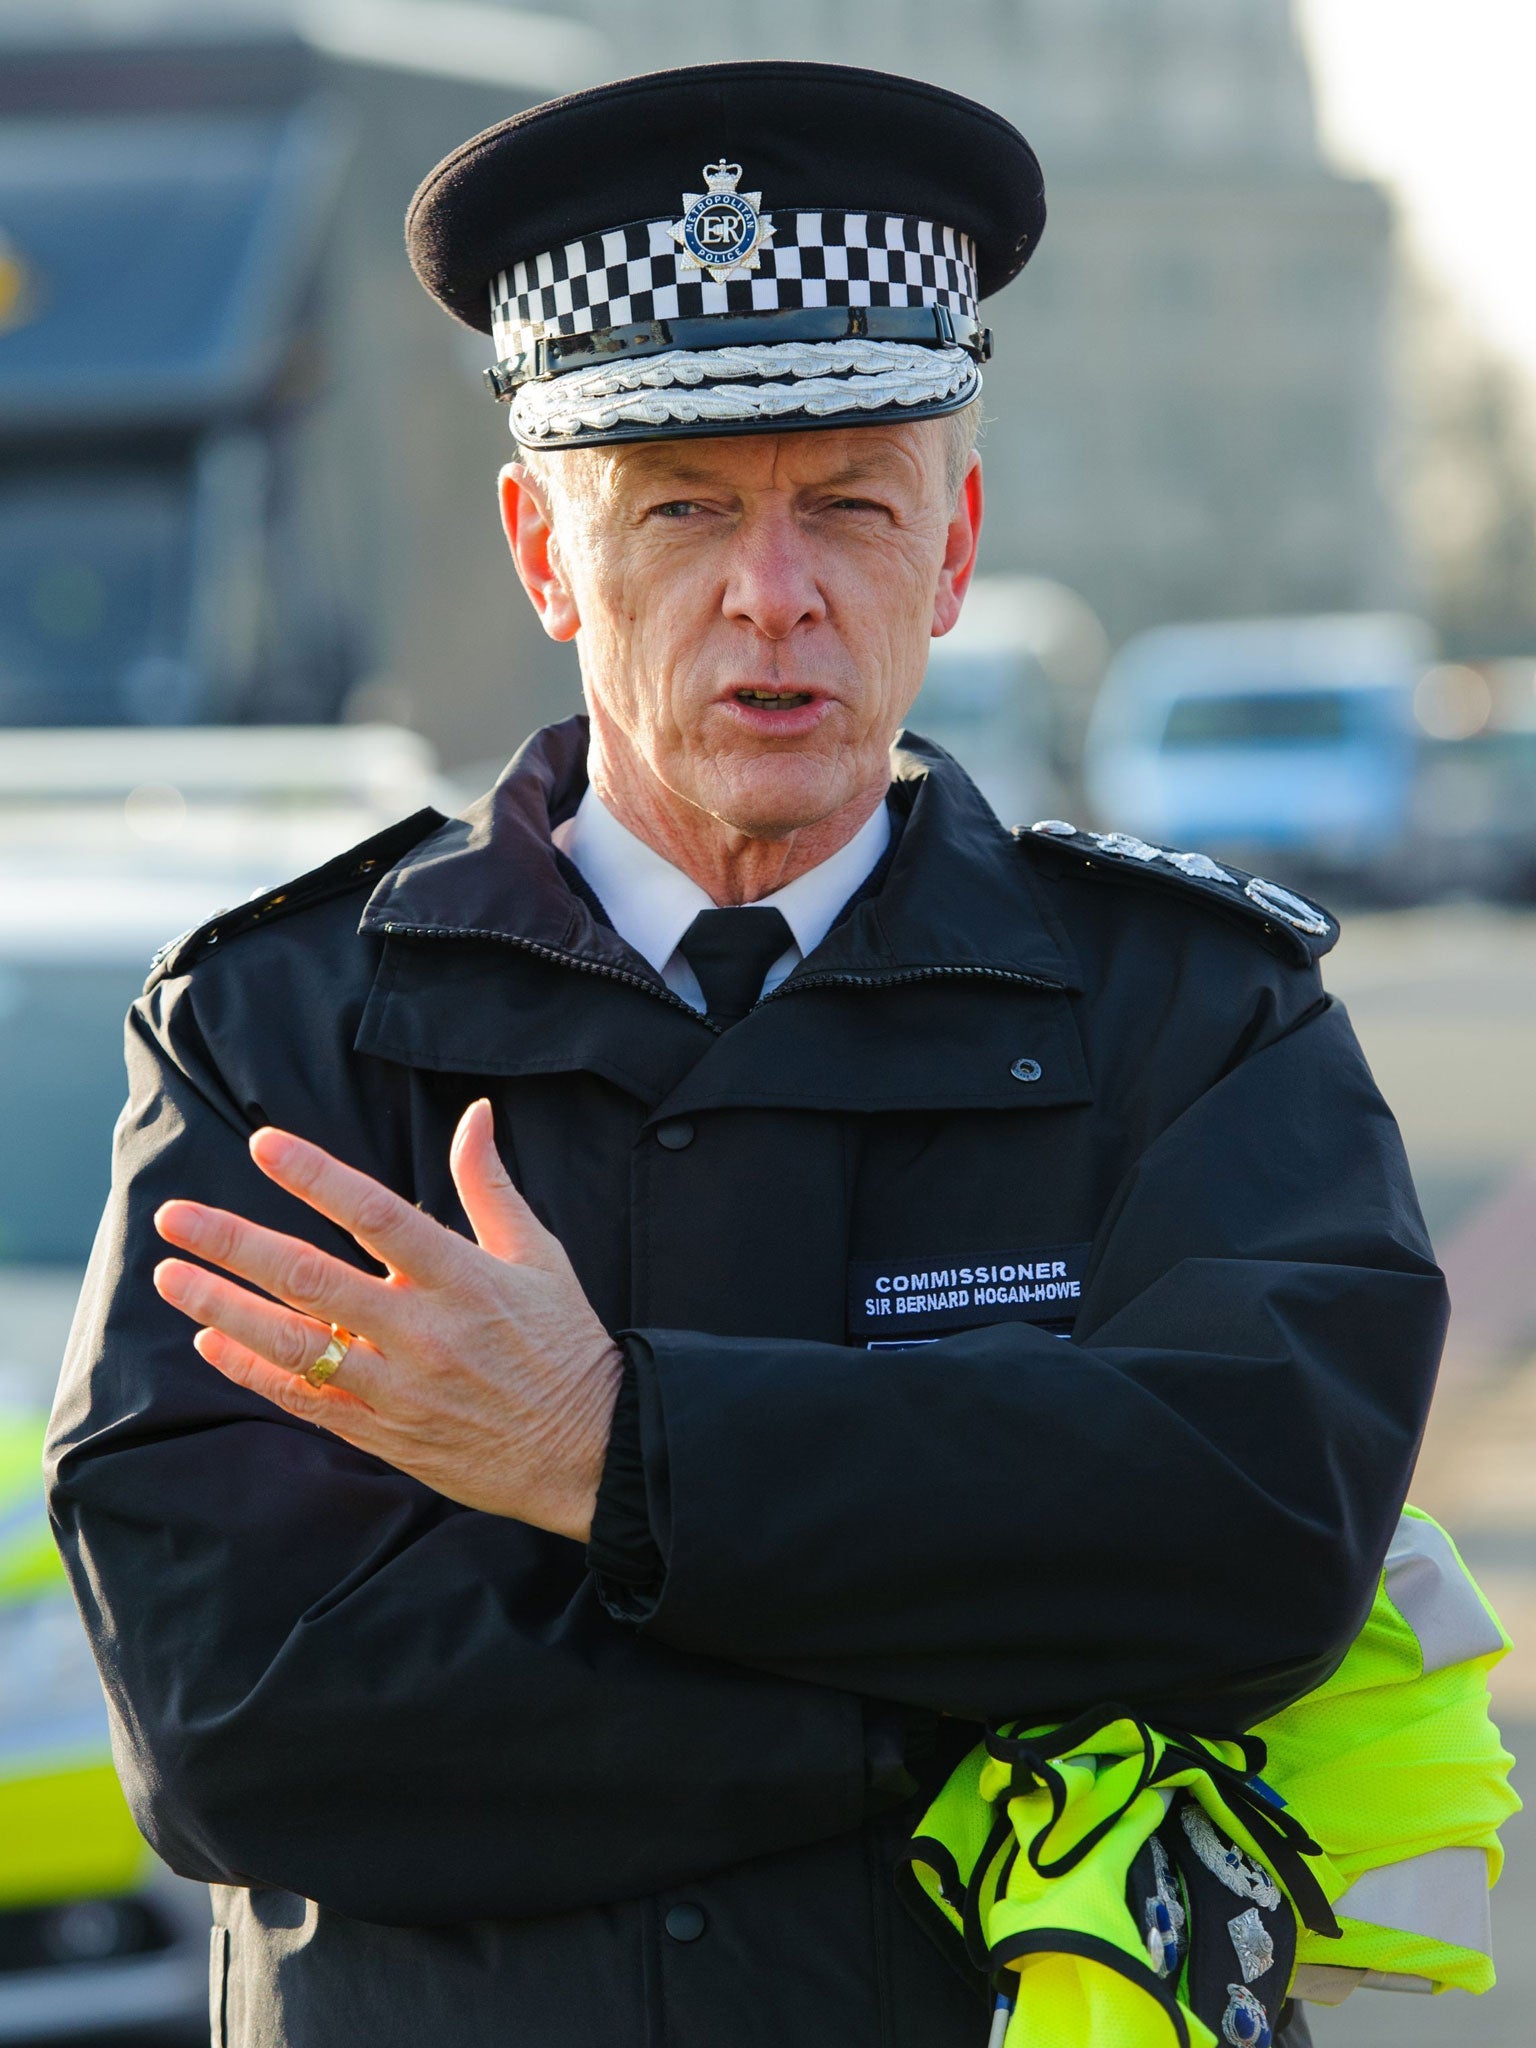 Sir Bernard Hogan-Howe, Britain's most senior police officer, could be investigated for his role in the aftermath of the Hillsborough football disaster